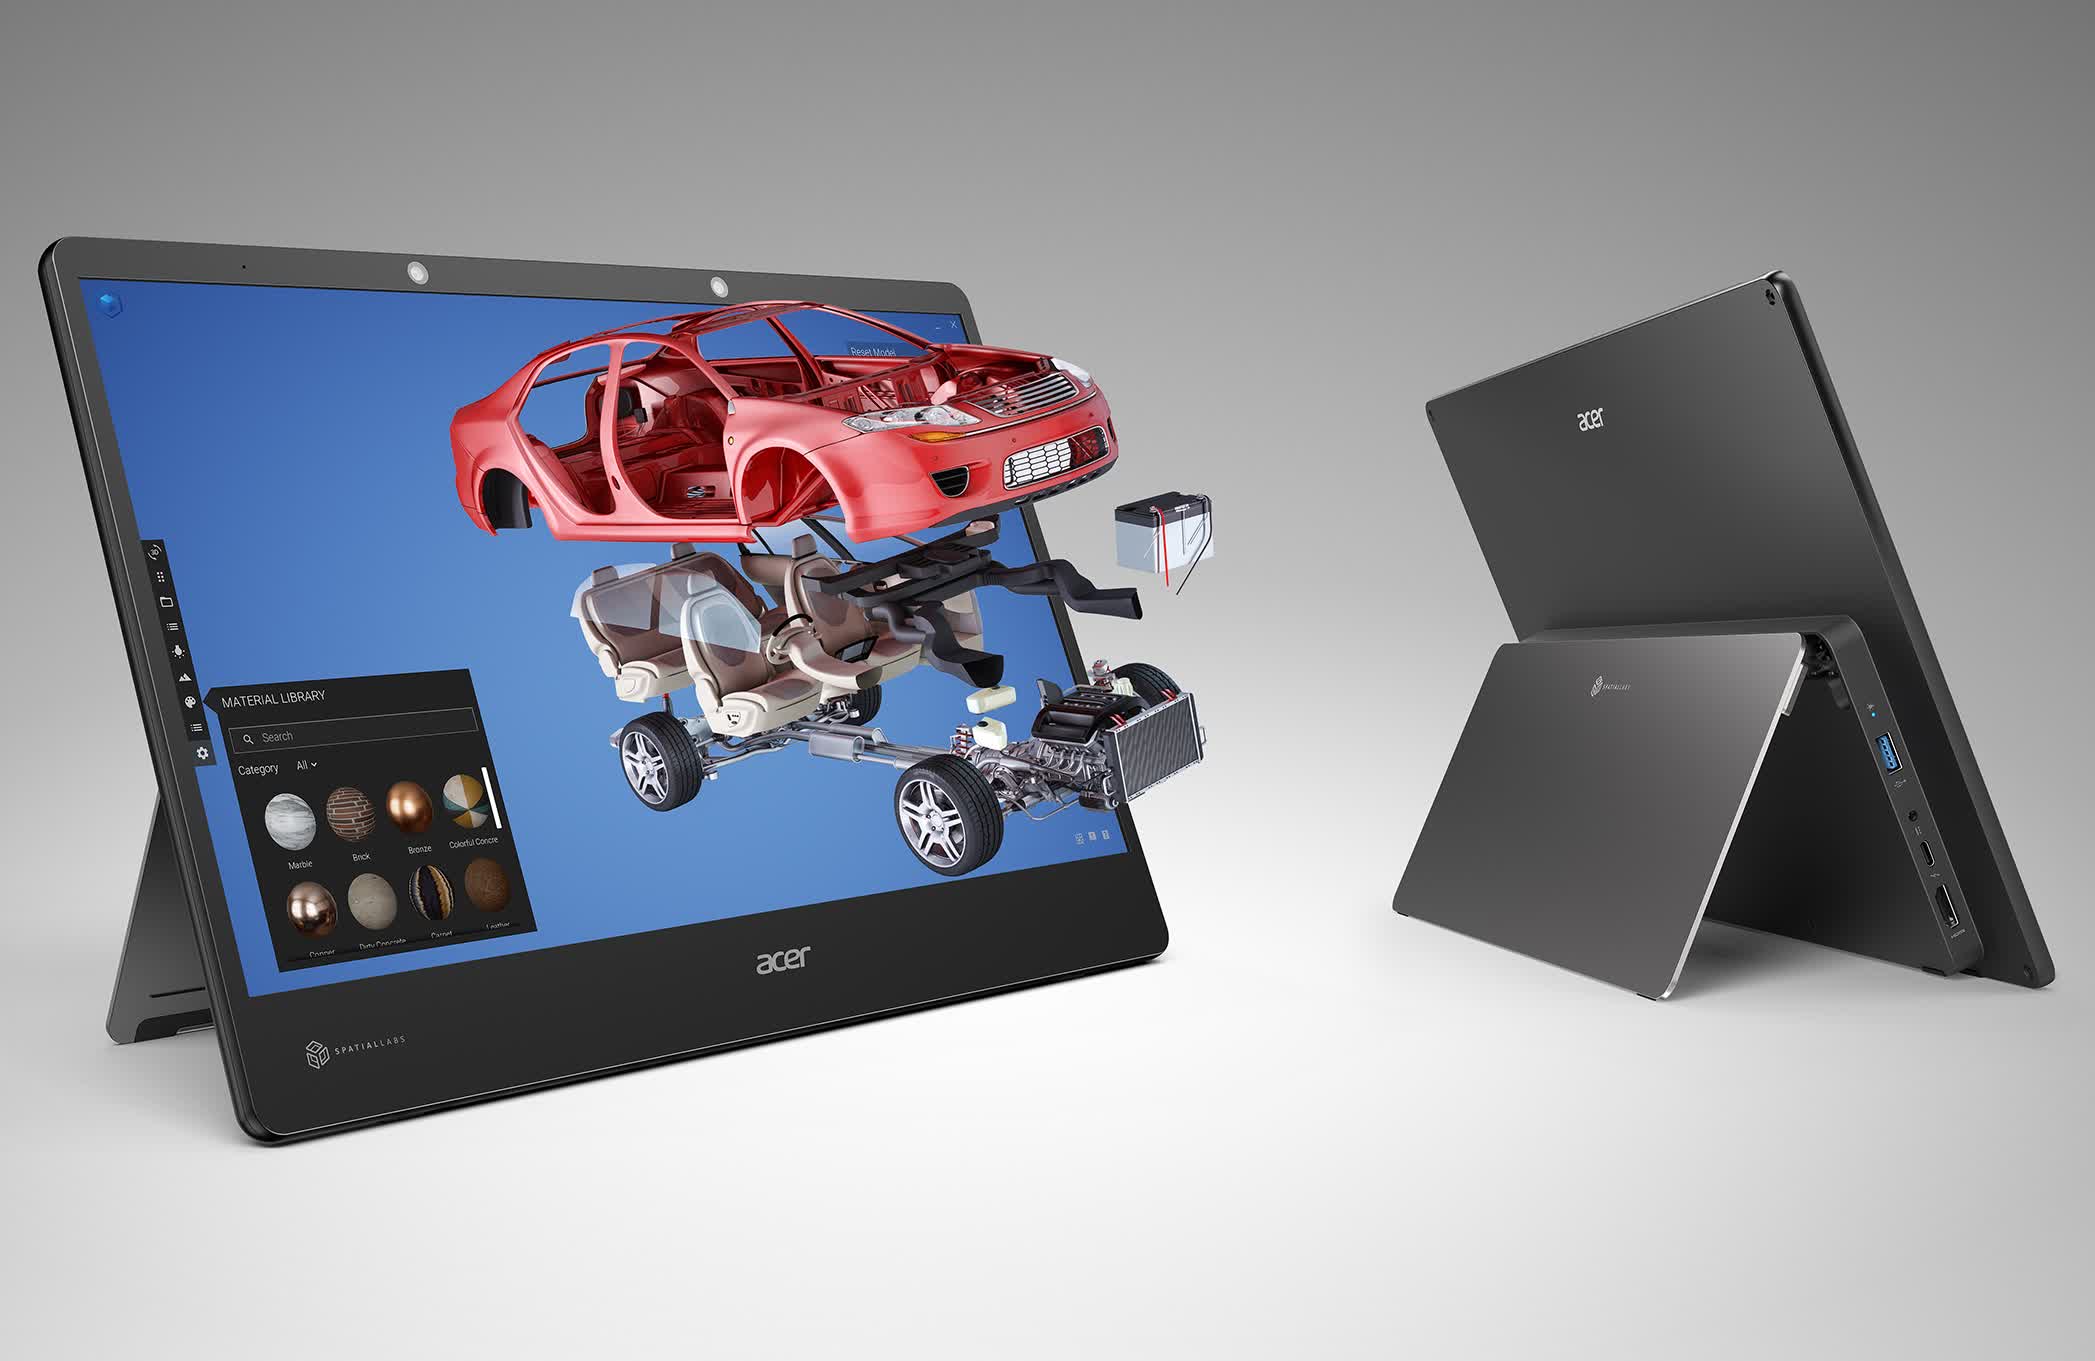 Acer announces a pair of portable, glasses-free stereoscopic 3D monitors